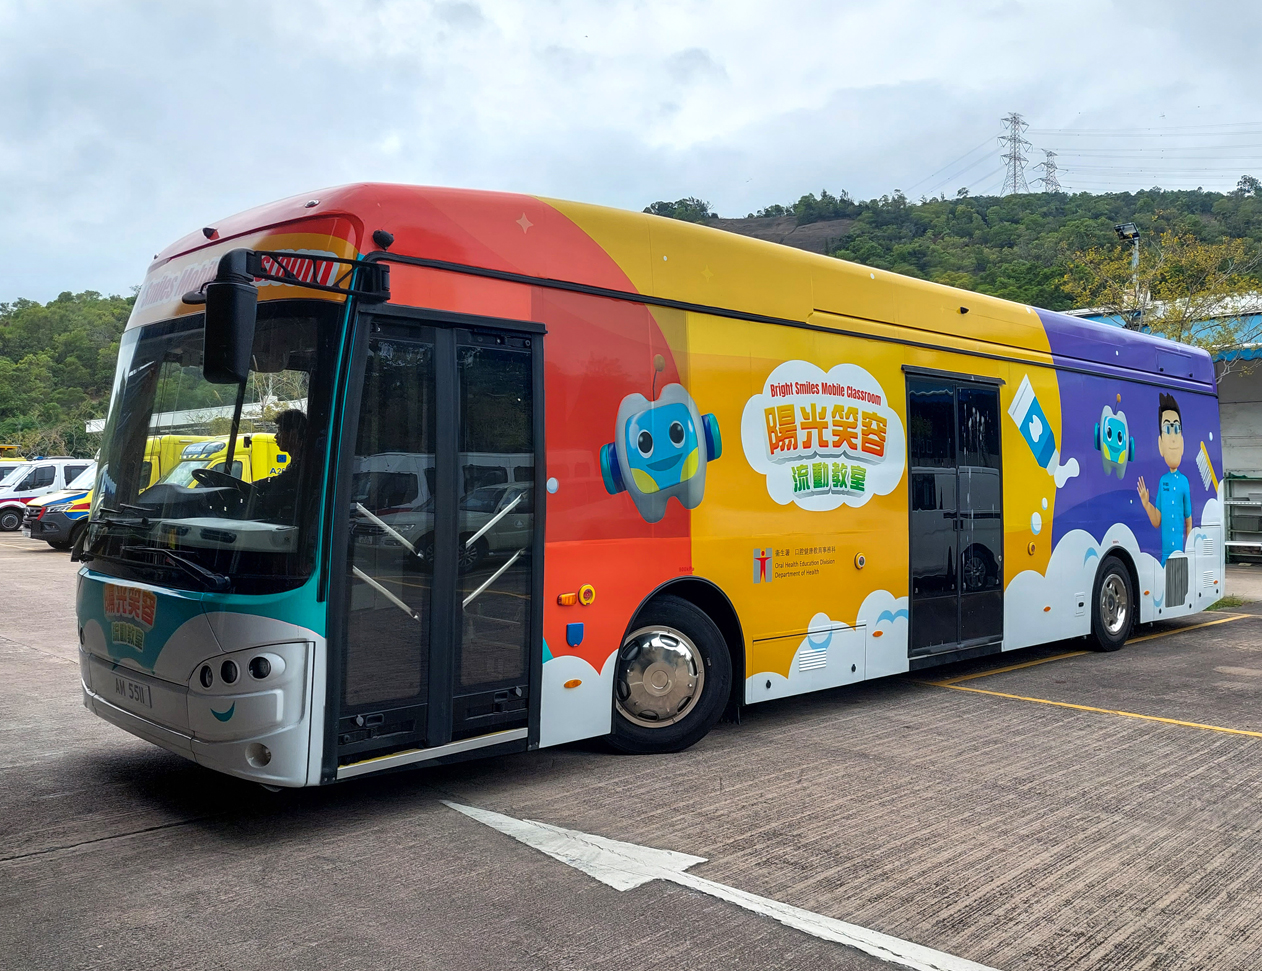 The health education promotion vehicle designed by the EMSD for our client is powered by electricity, thus being more environmentally friendly than traditional diesel-engine vehicles.